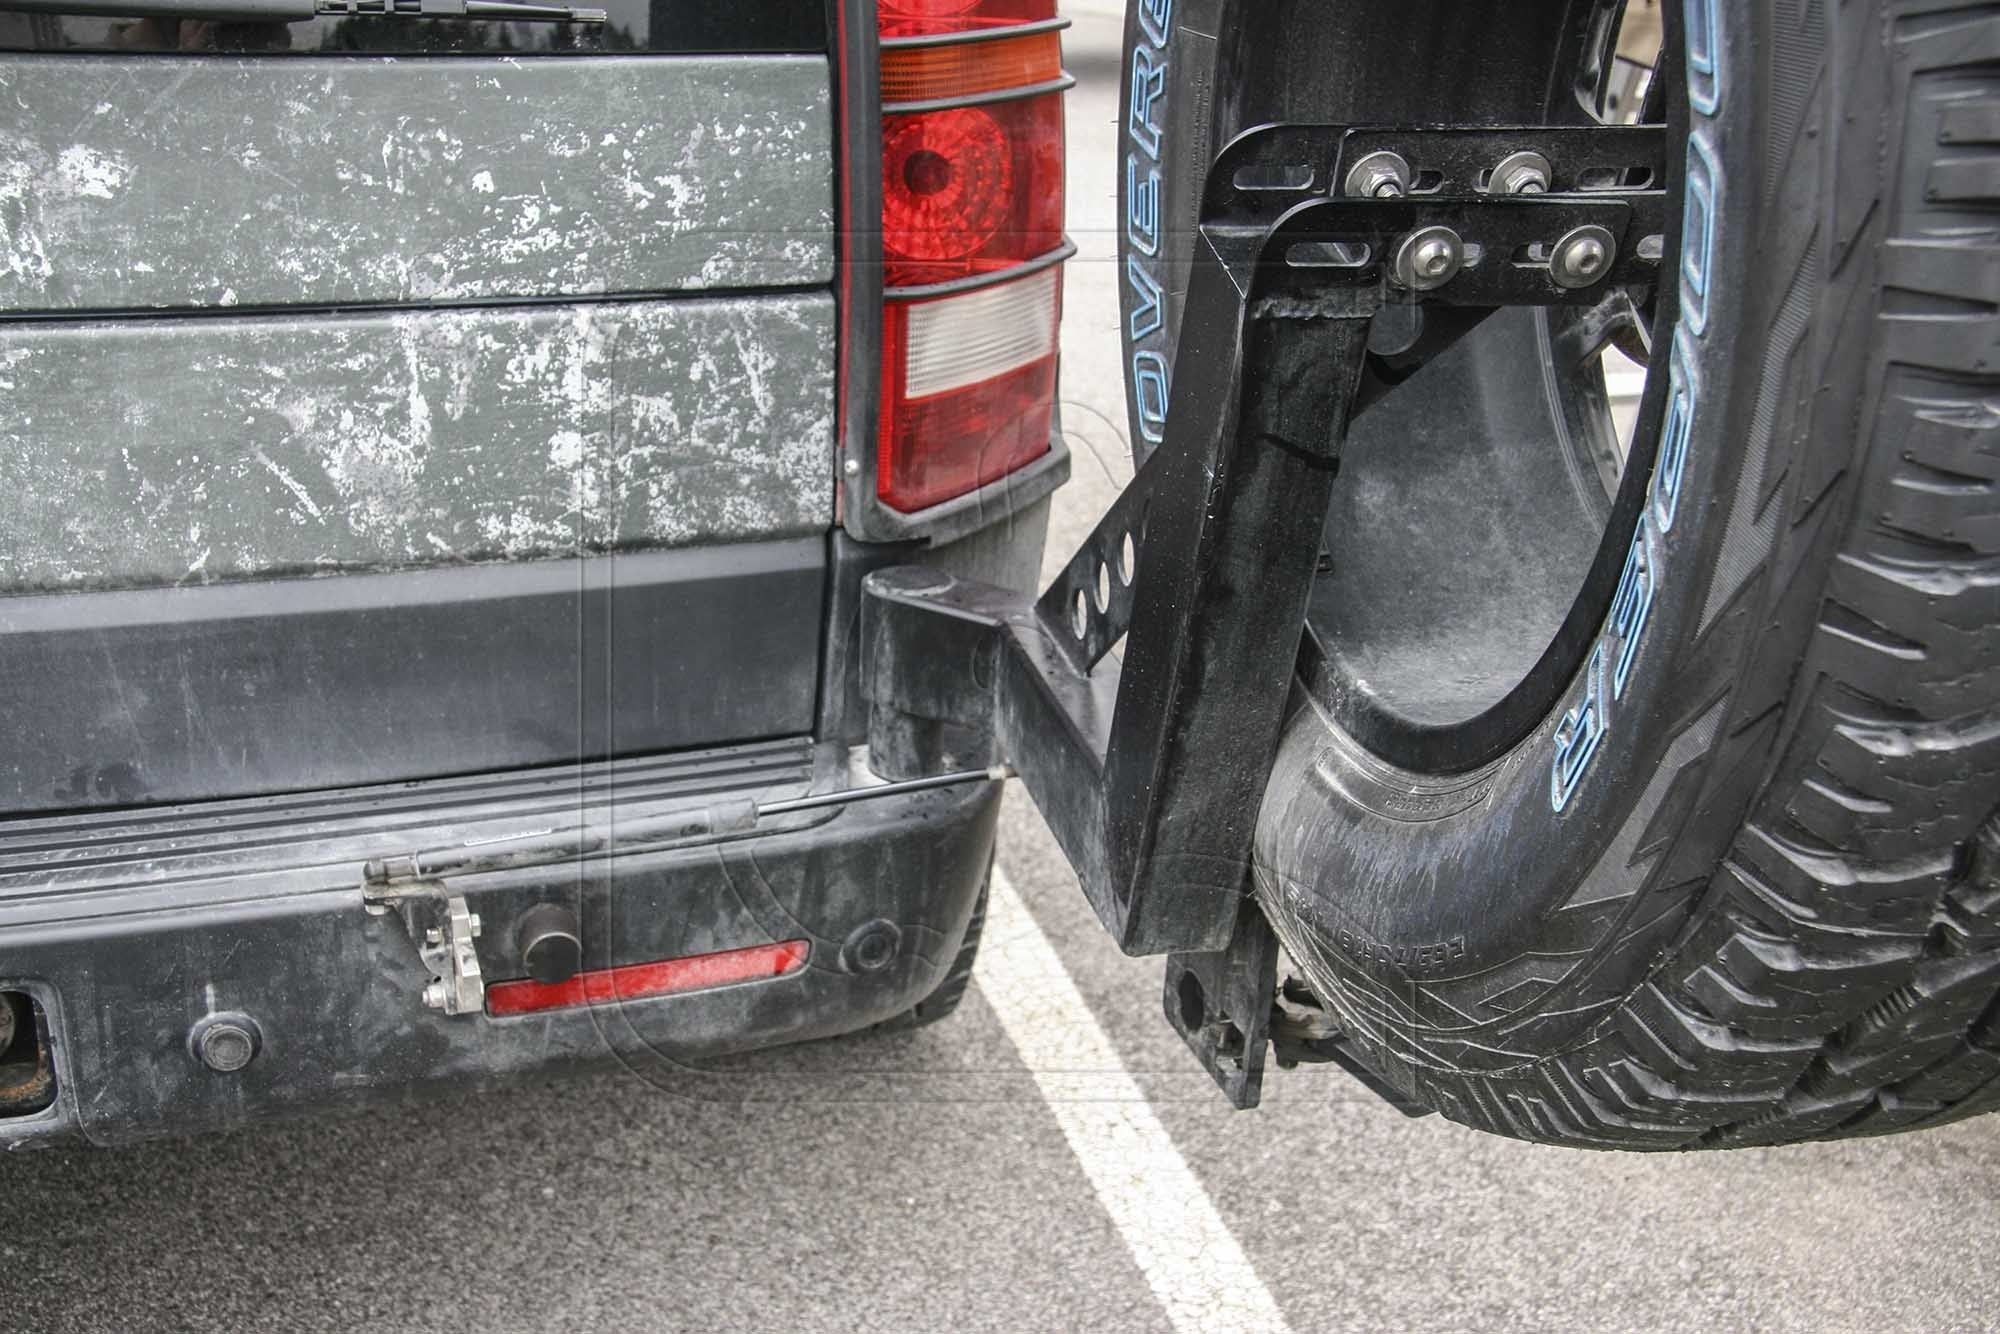 Land Rover LR3/LR4 Stainless Steel Spare Tire Carrier [***6-8 WEEK LEAD-TIME***]